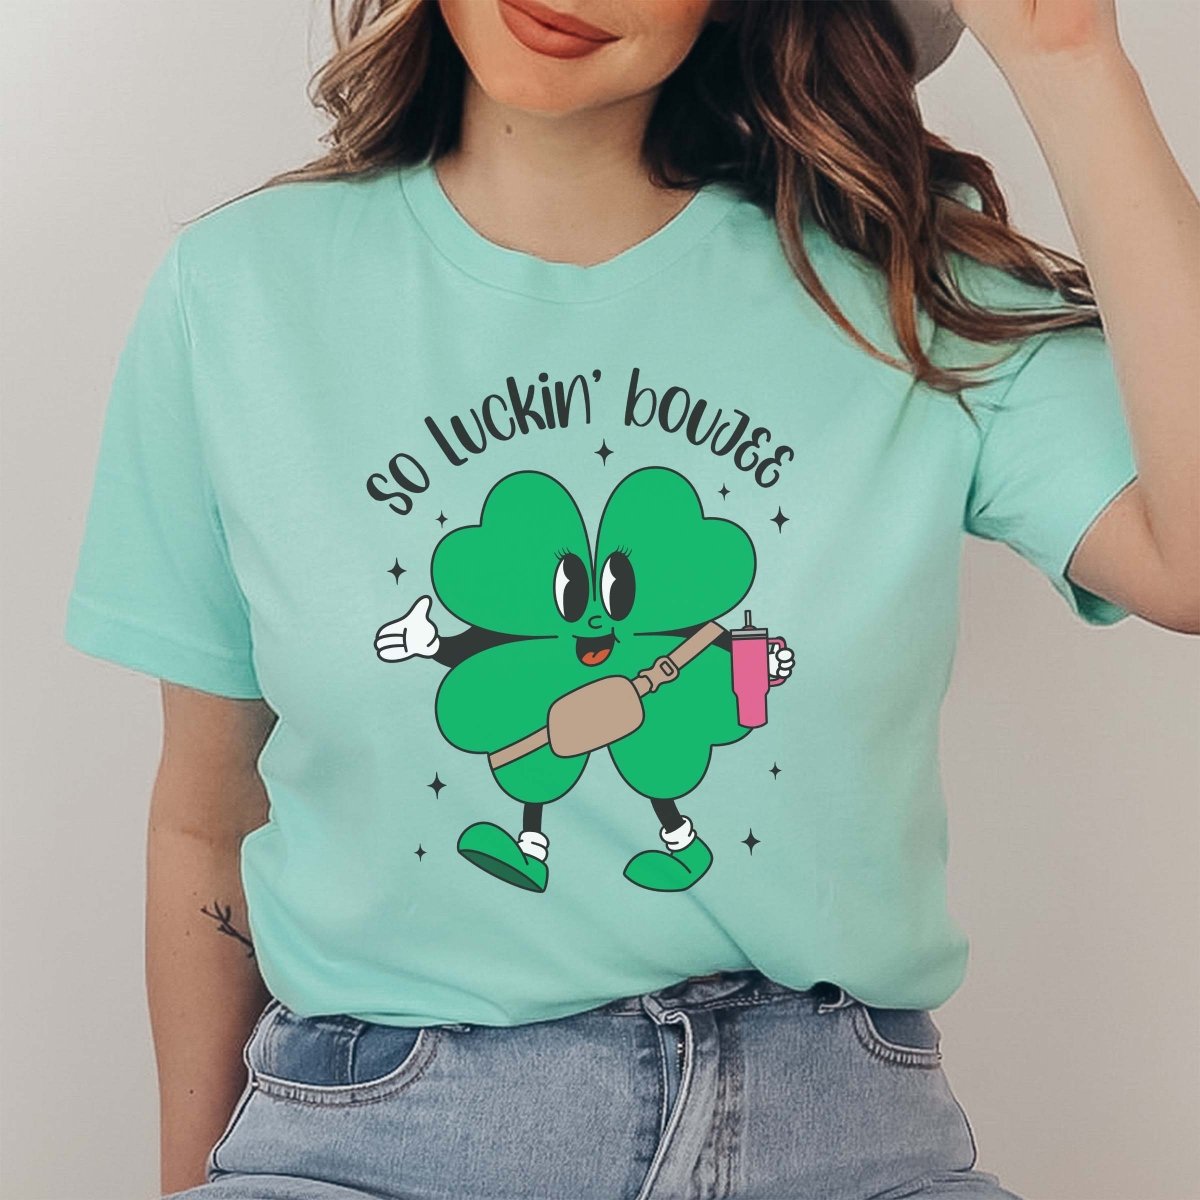 So Luckin Boujee Clover Wholesale Tee - Limeberry Designs